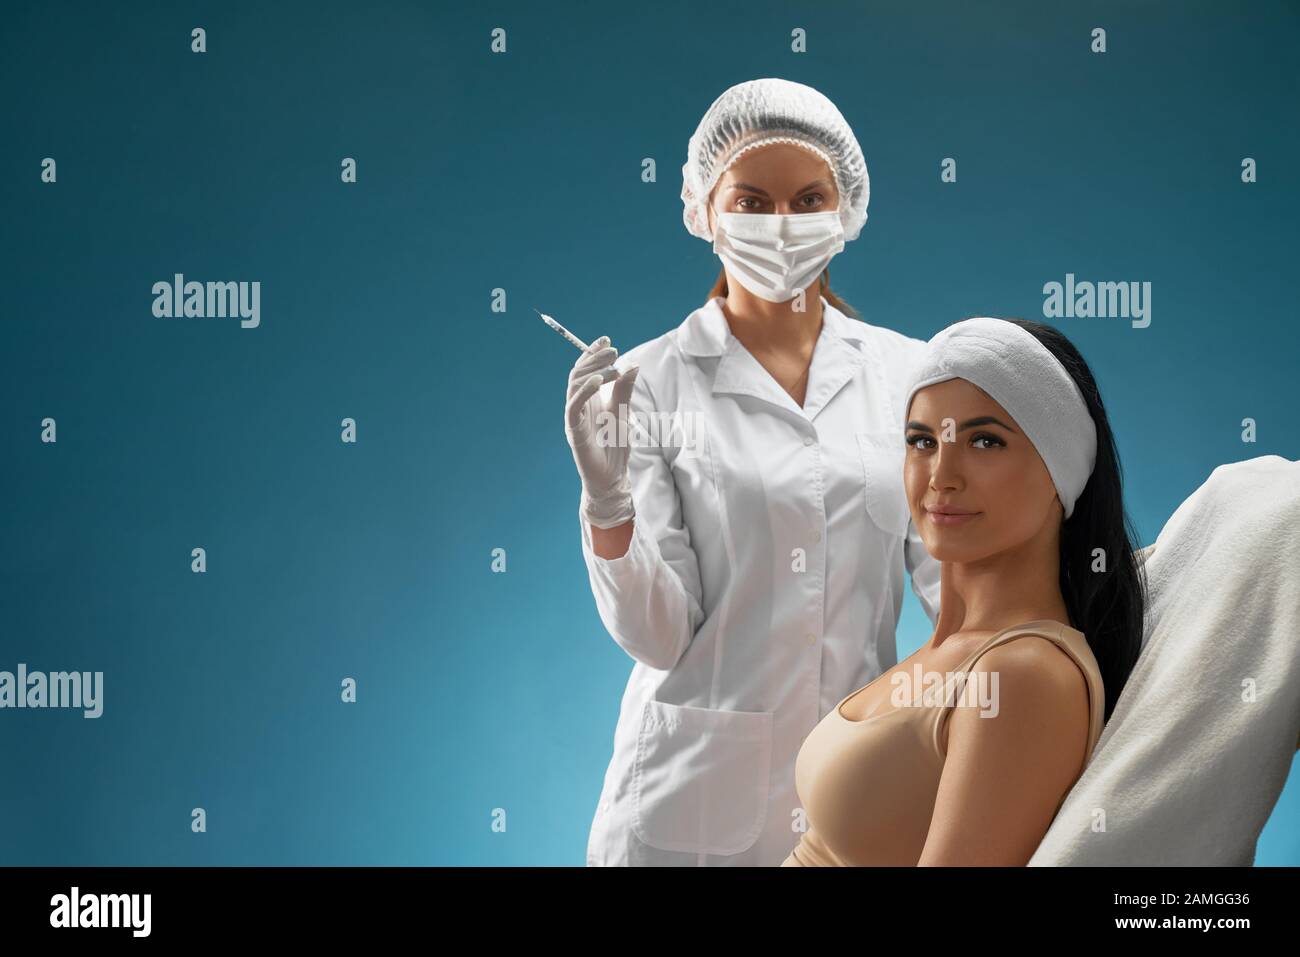 Side view of female cosmetologist in mask and coat holding syringe. Brunette woman patient with towel on head sitting in chair, smiling, looking at camera, isolated on blue. Concept of cosmetology. Stock Photo